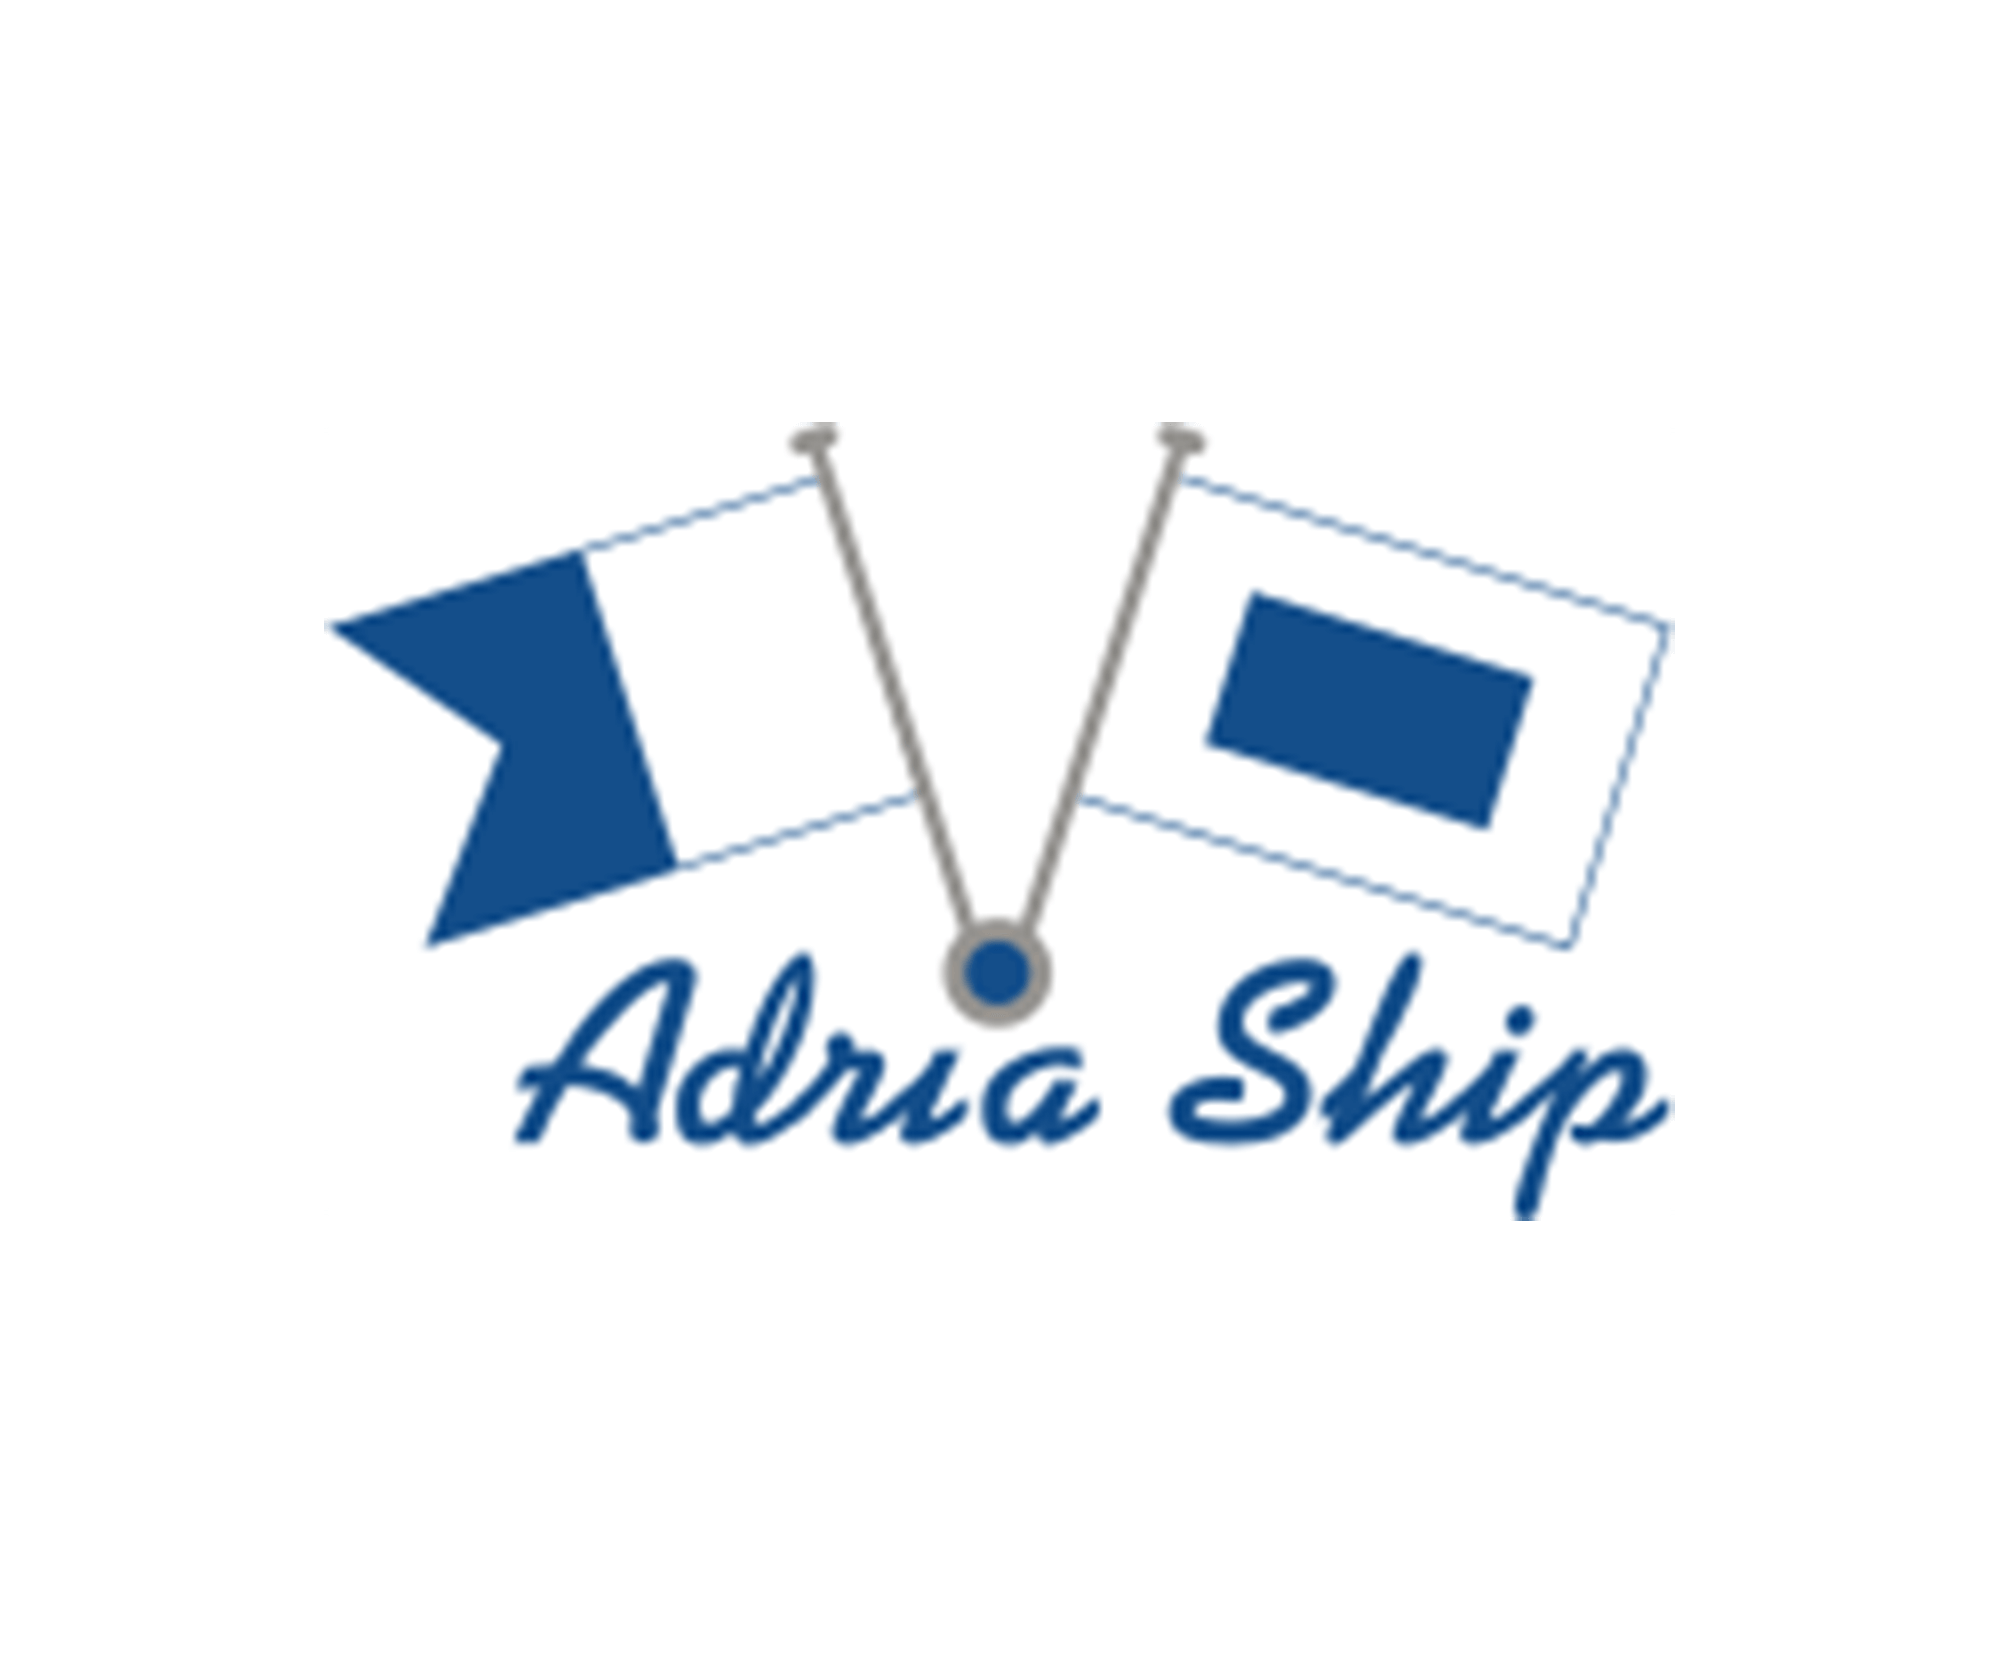 Located in Italy, Adria Ship collaborates with Multicats International.